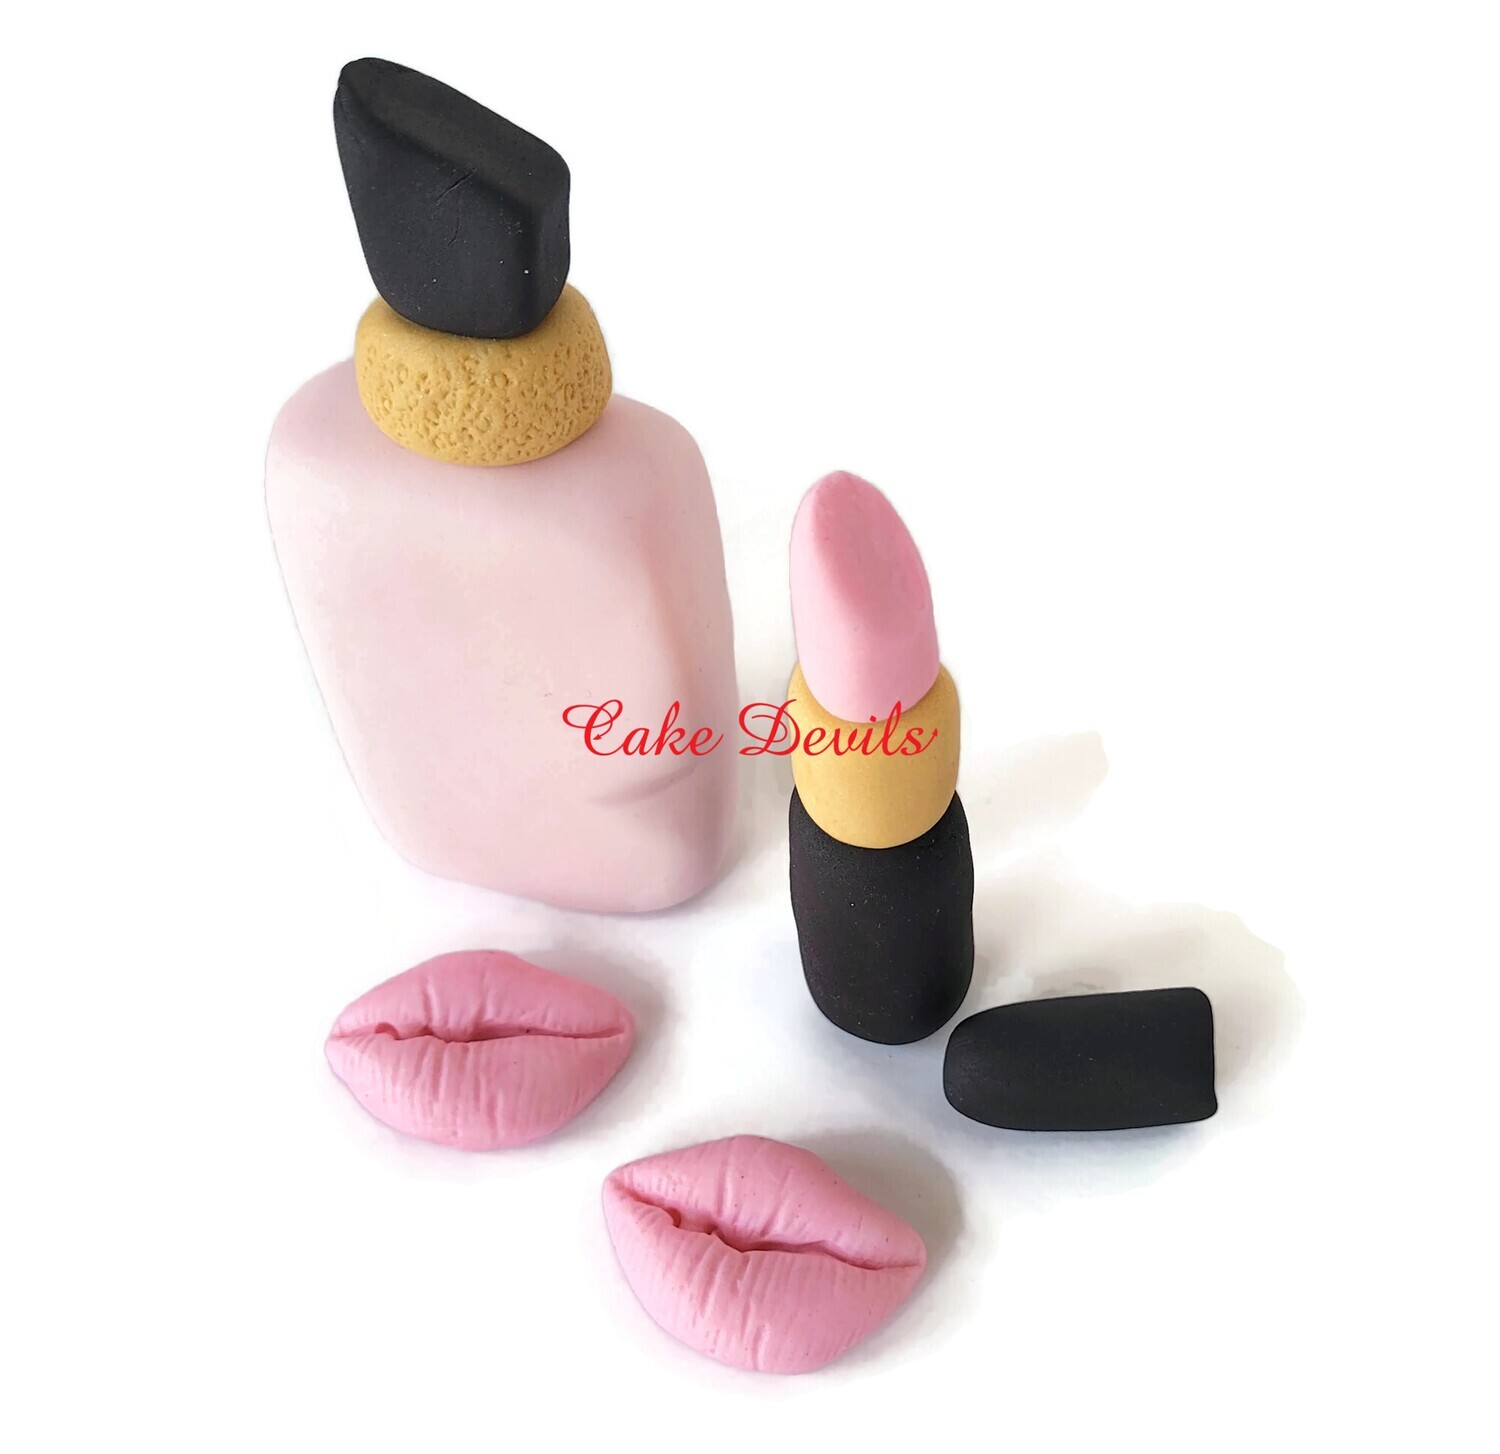 Fondant Lipstick, Lips and Perfume Cake Toppers - Add a Touch of Elegance and Sophistication to Any Cake